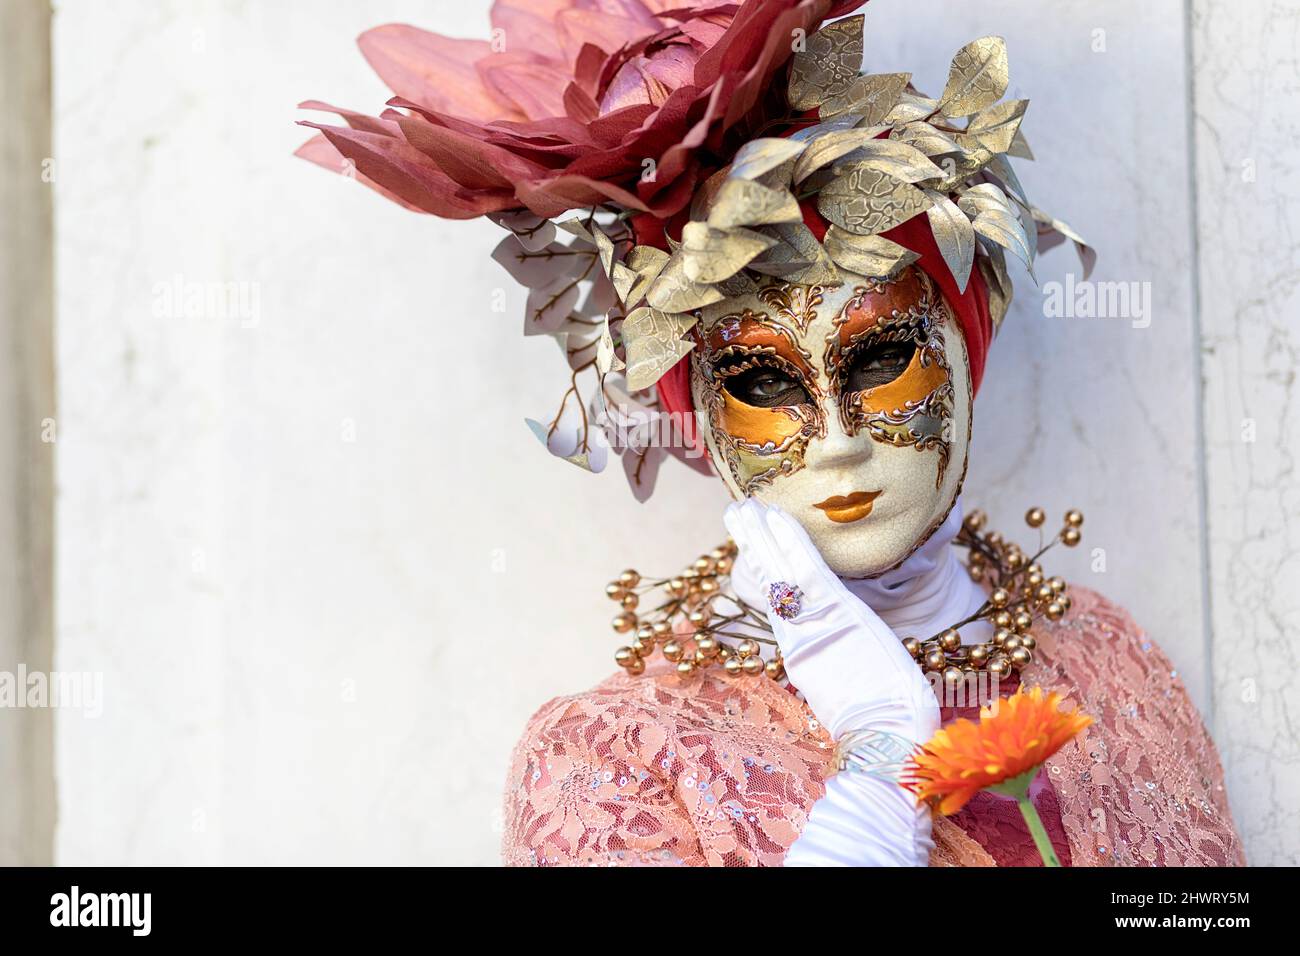 Woman in a beautiful traditional venetian costume and mask posing at the Venice carneval. St. Mark's Square, Venice Stock Photo